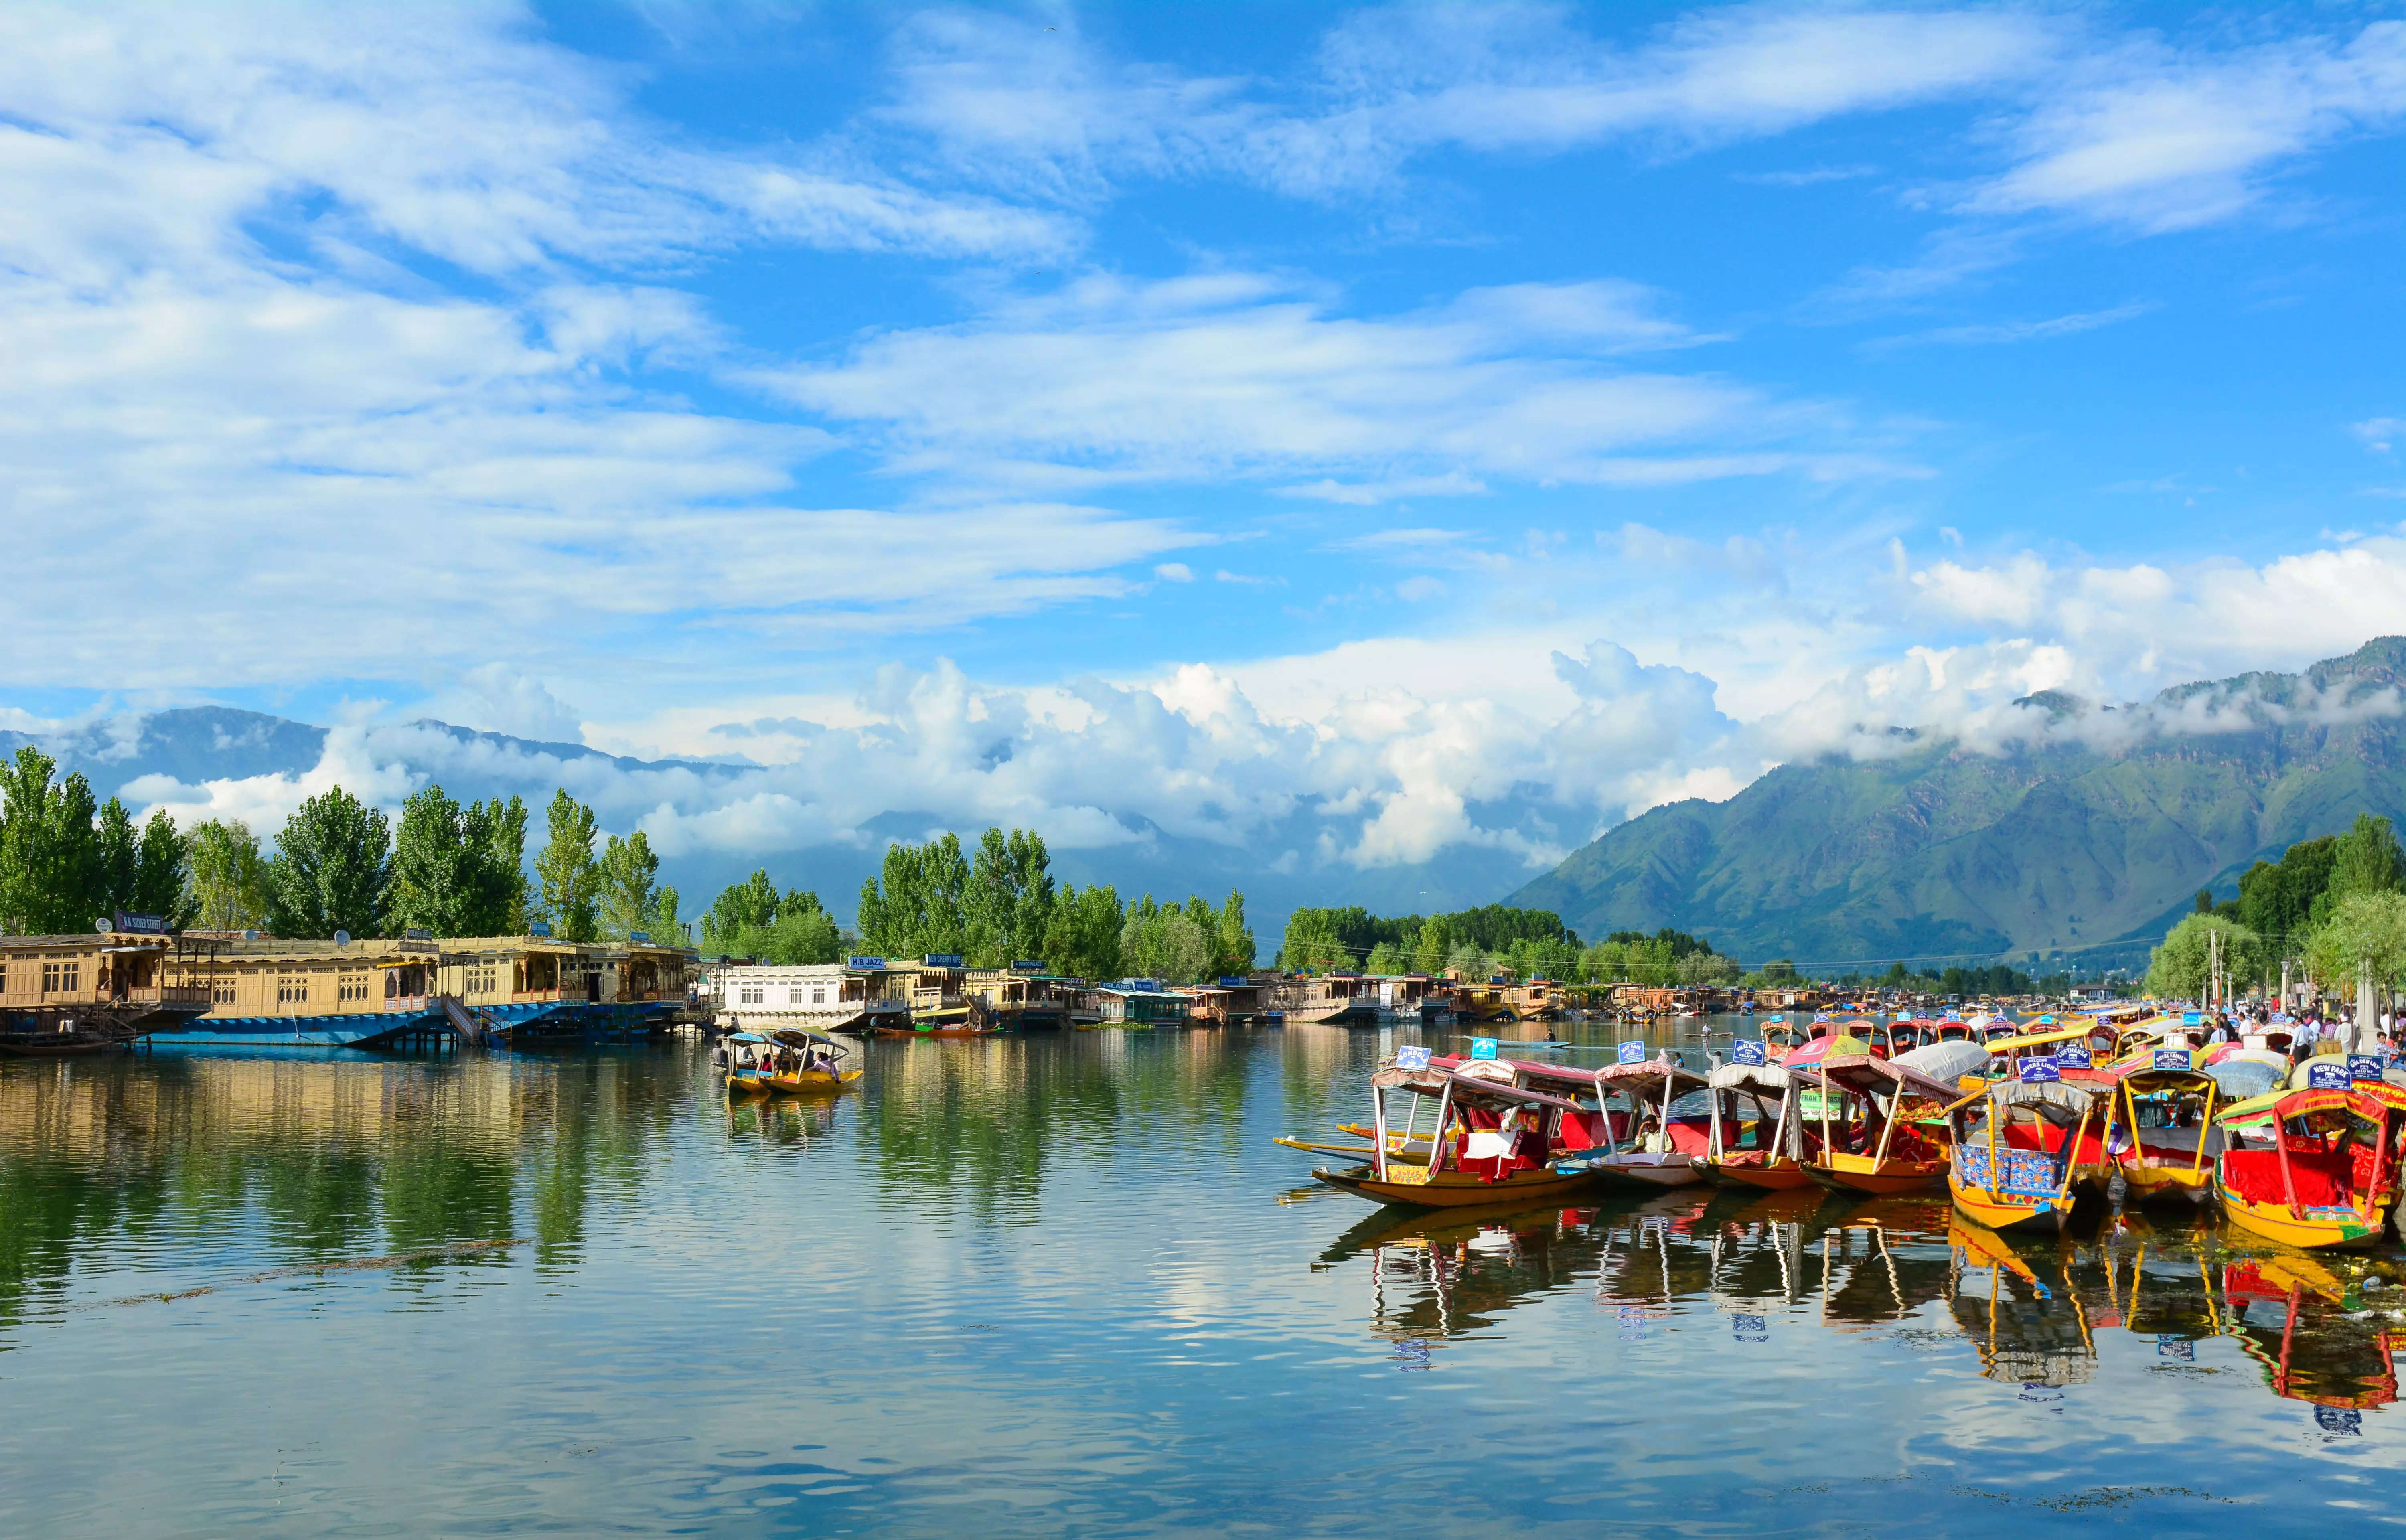 Jammu and Kashmir govt sets March-end deadline for completion of ongoing tourism projects